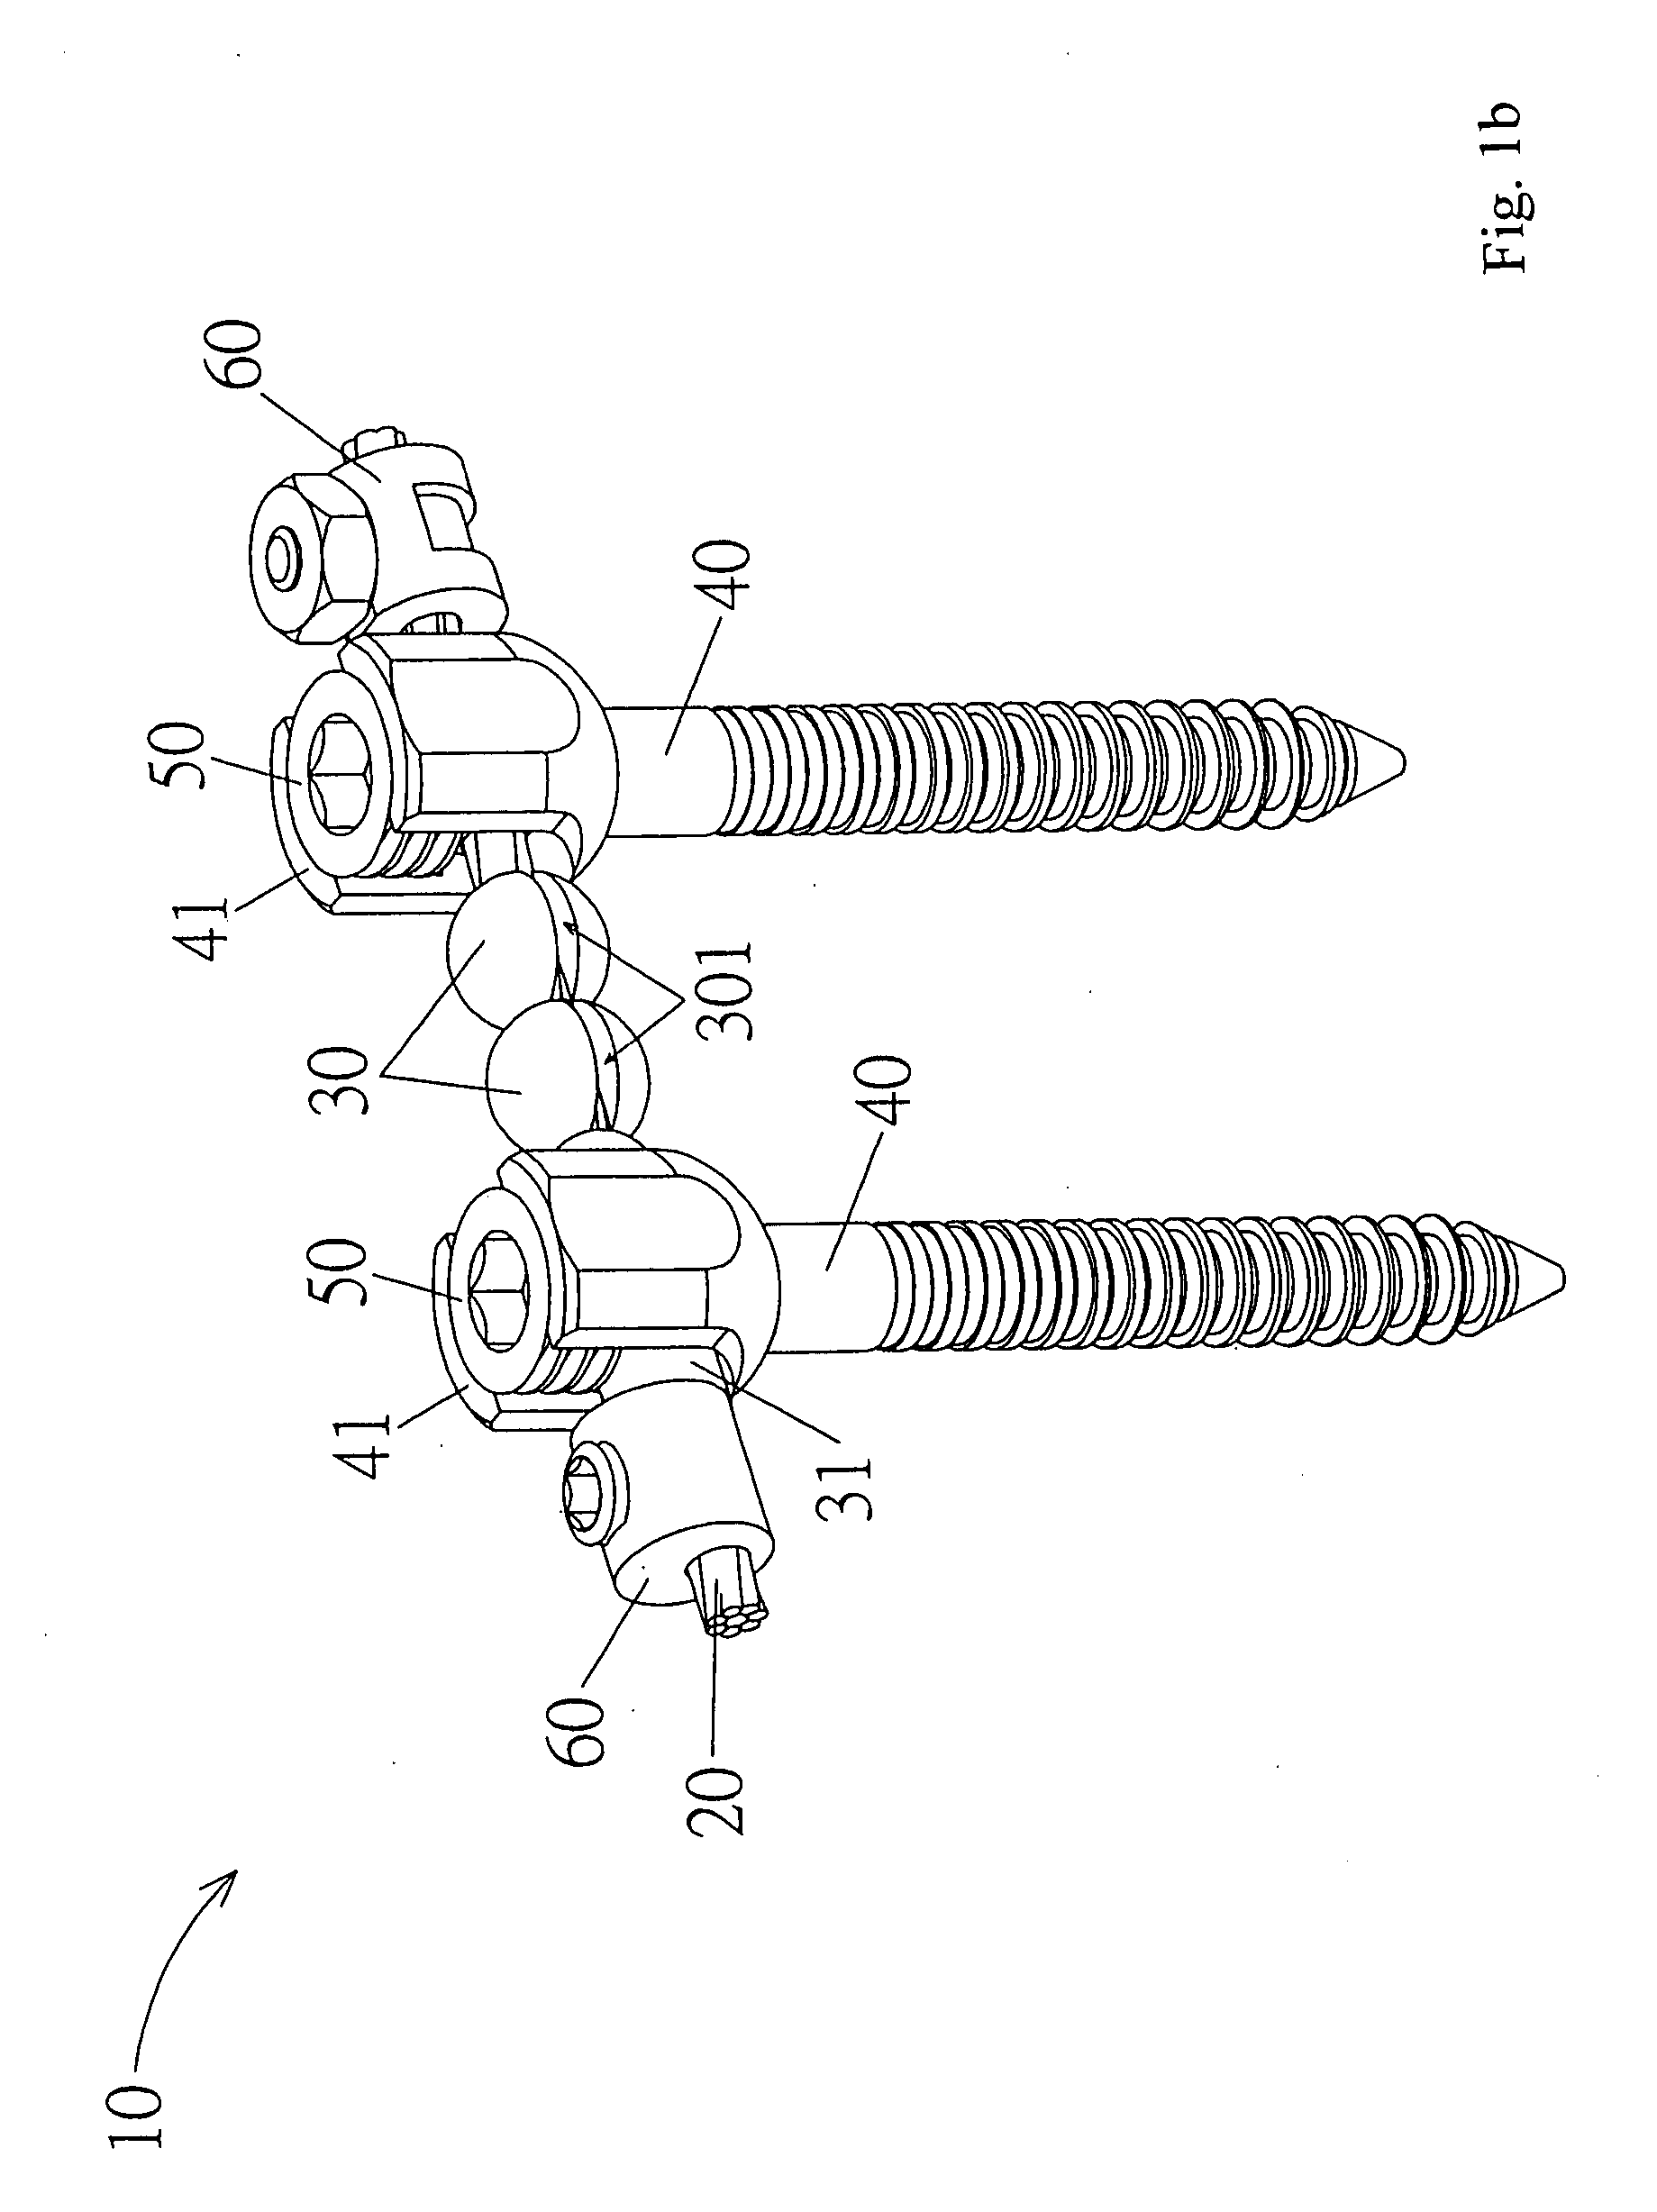 Spinal fixation device having a flexible cable and jointed components received thereon